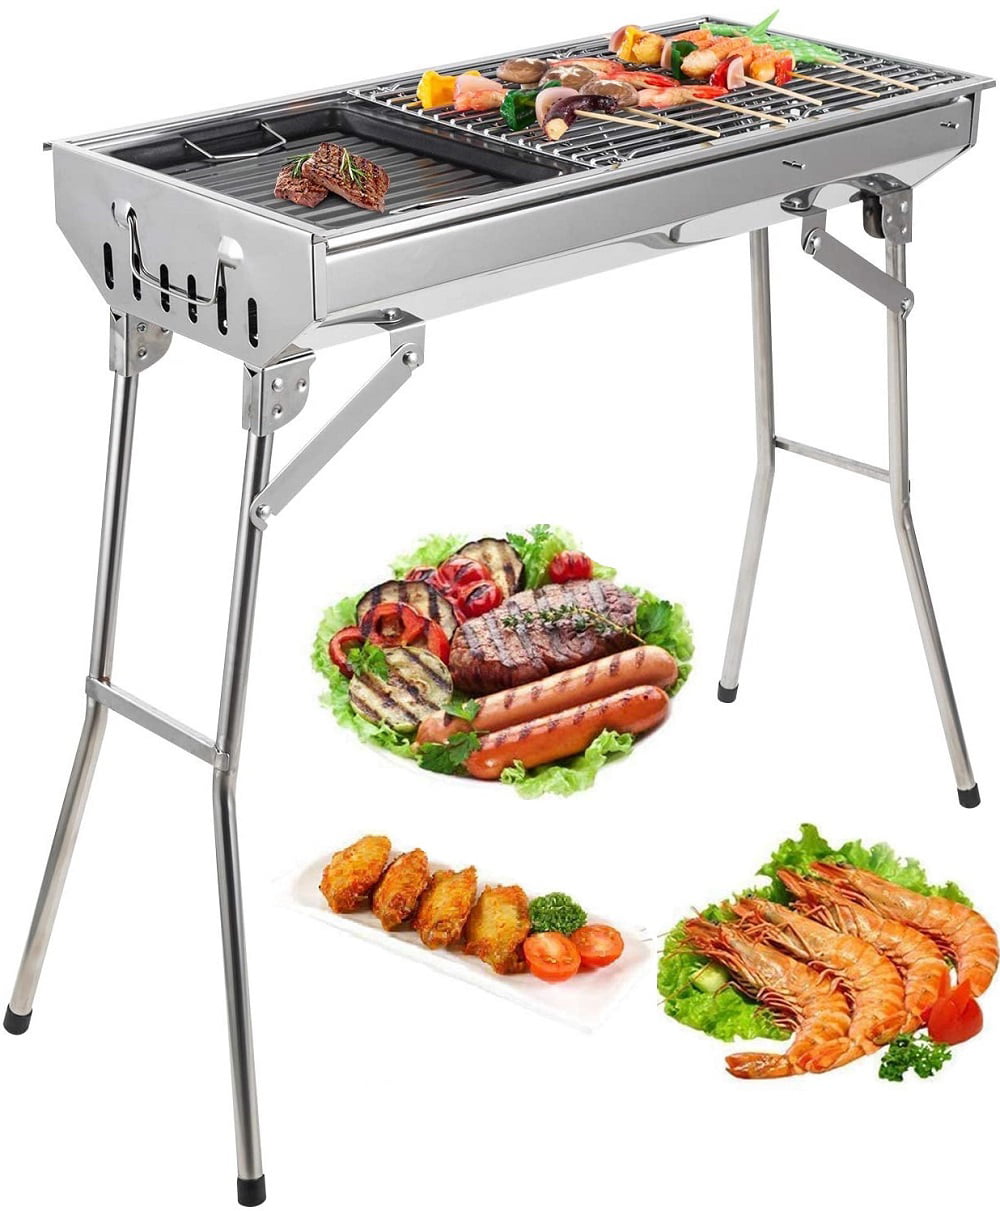 Foldable Charcoal Grill Barbecue Portable BBQ Stainless Steel for Camping Garden